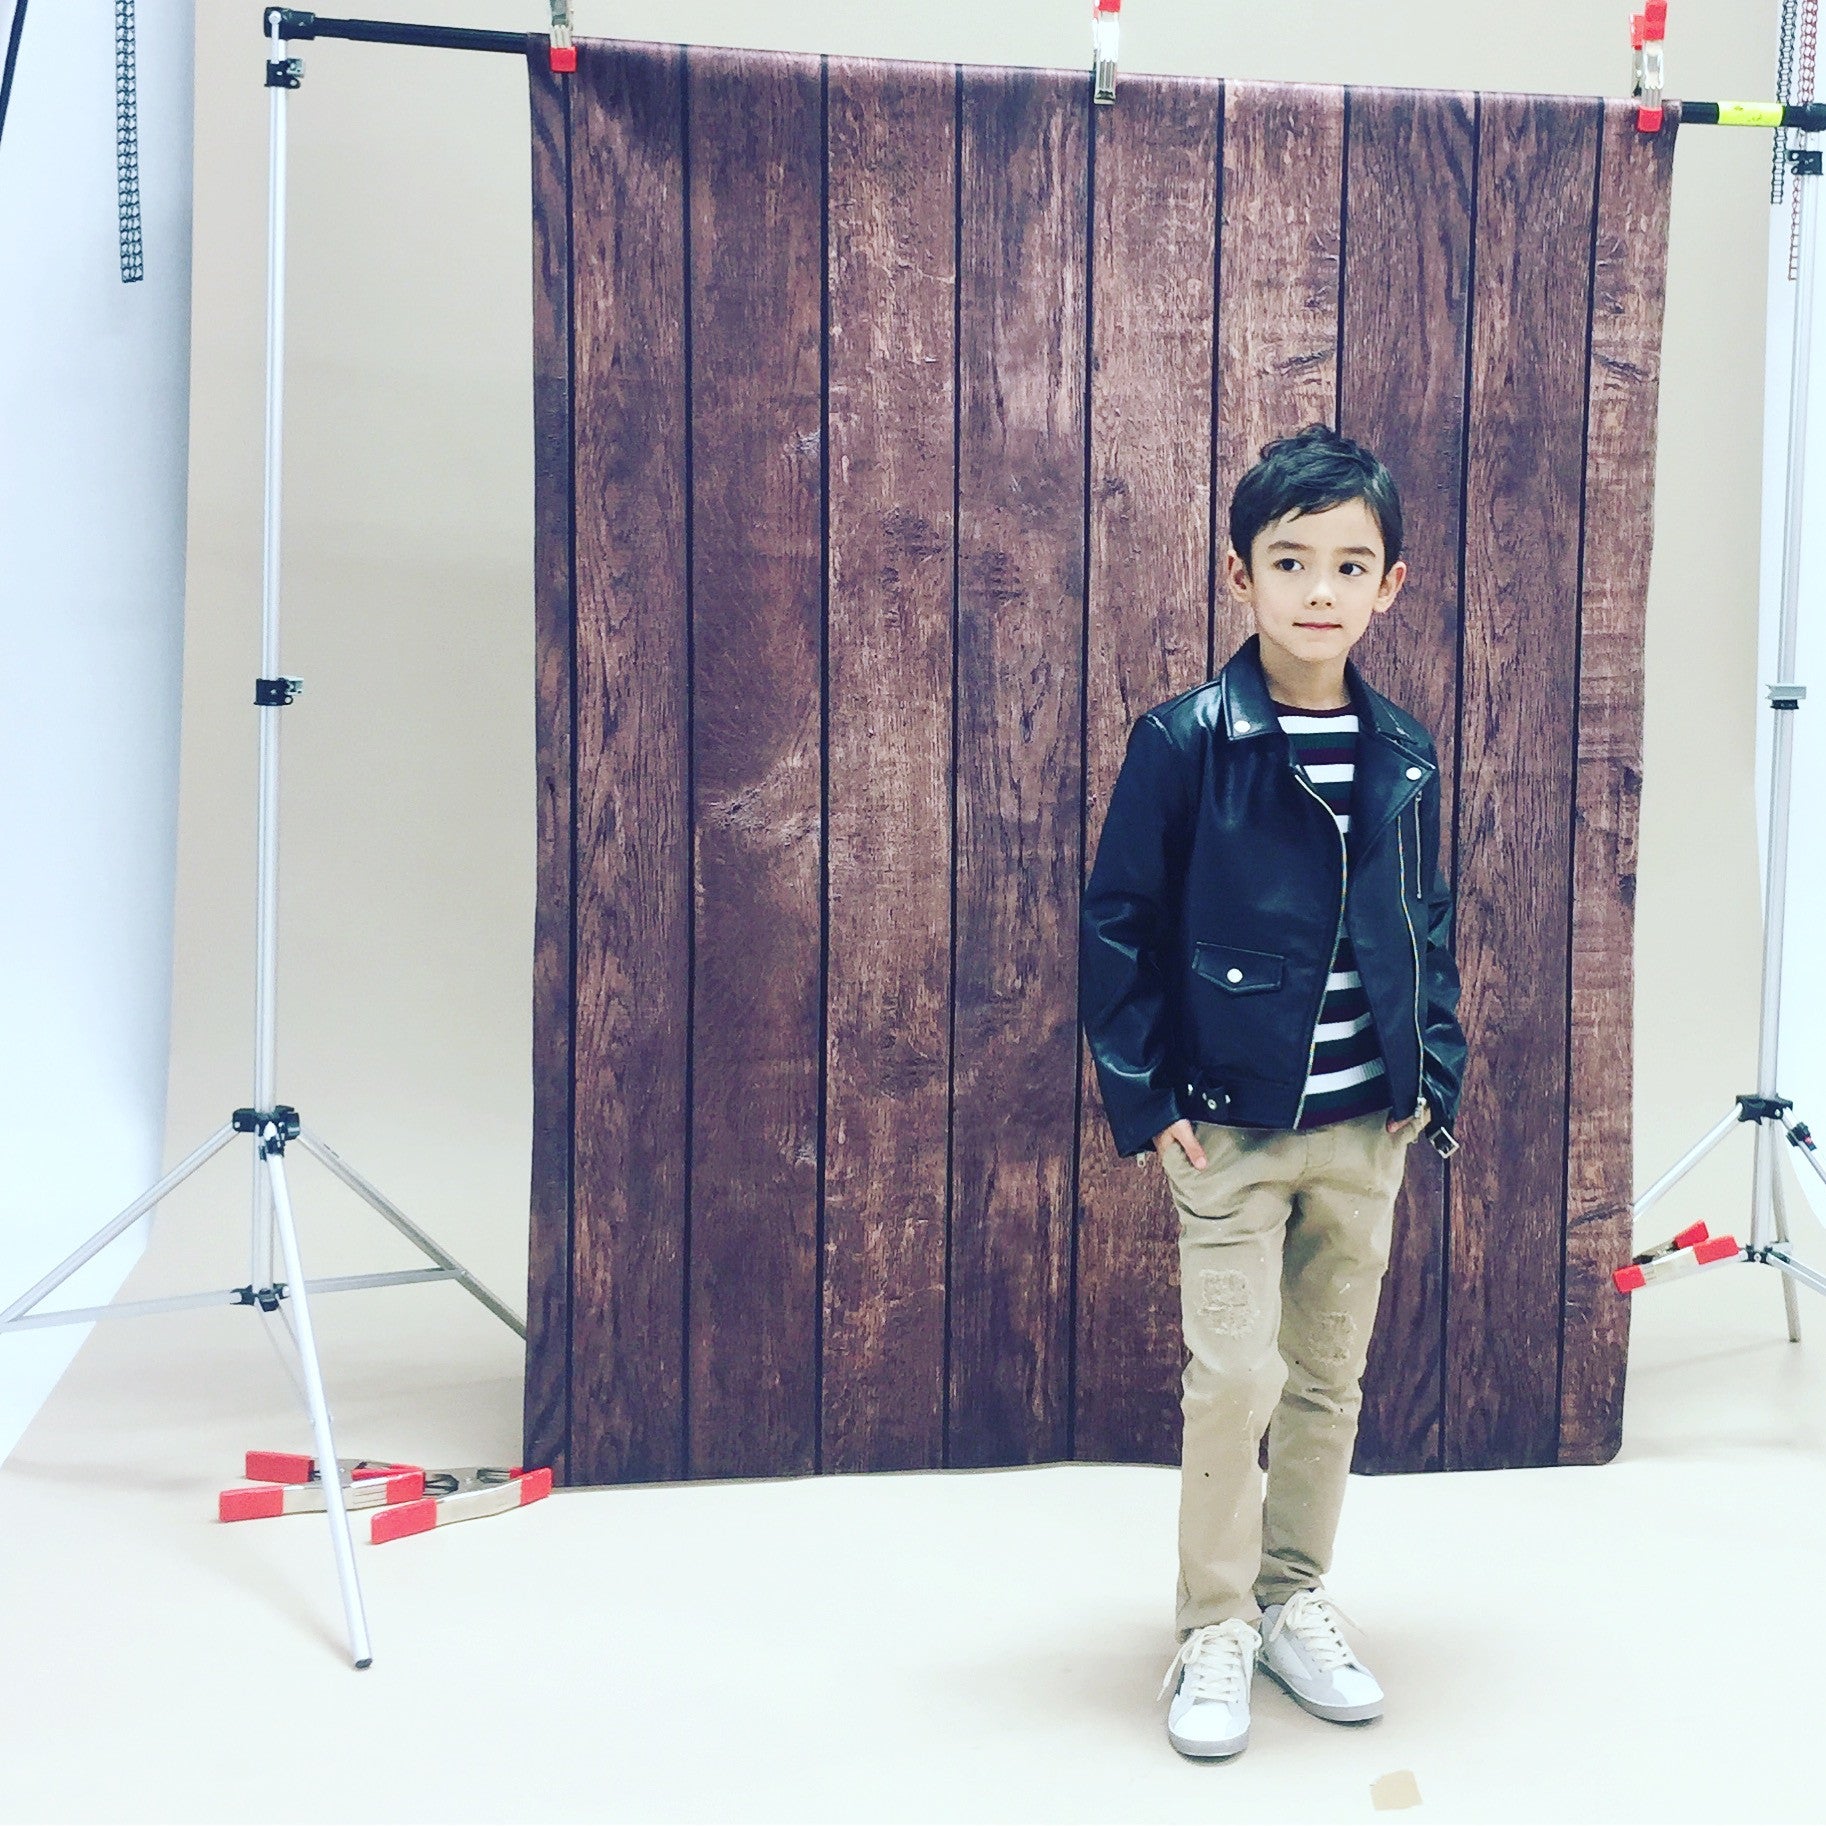 Vancouver Kids Fashion Week Instagram Takeover!